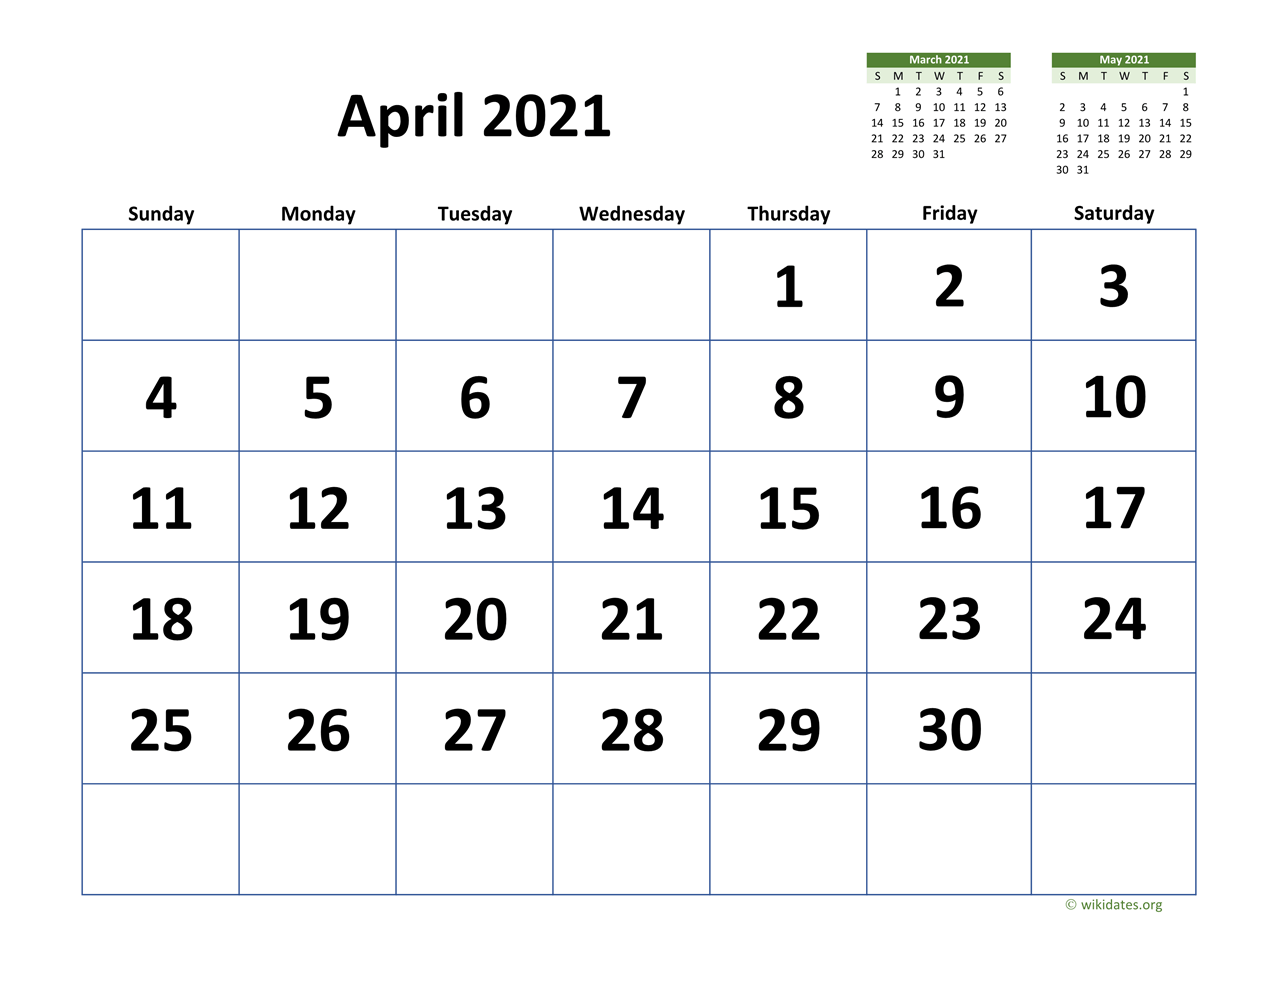 april-2021-calendar-with-extra-large-dates-wikidates